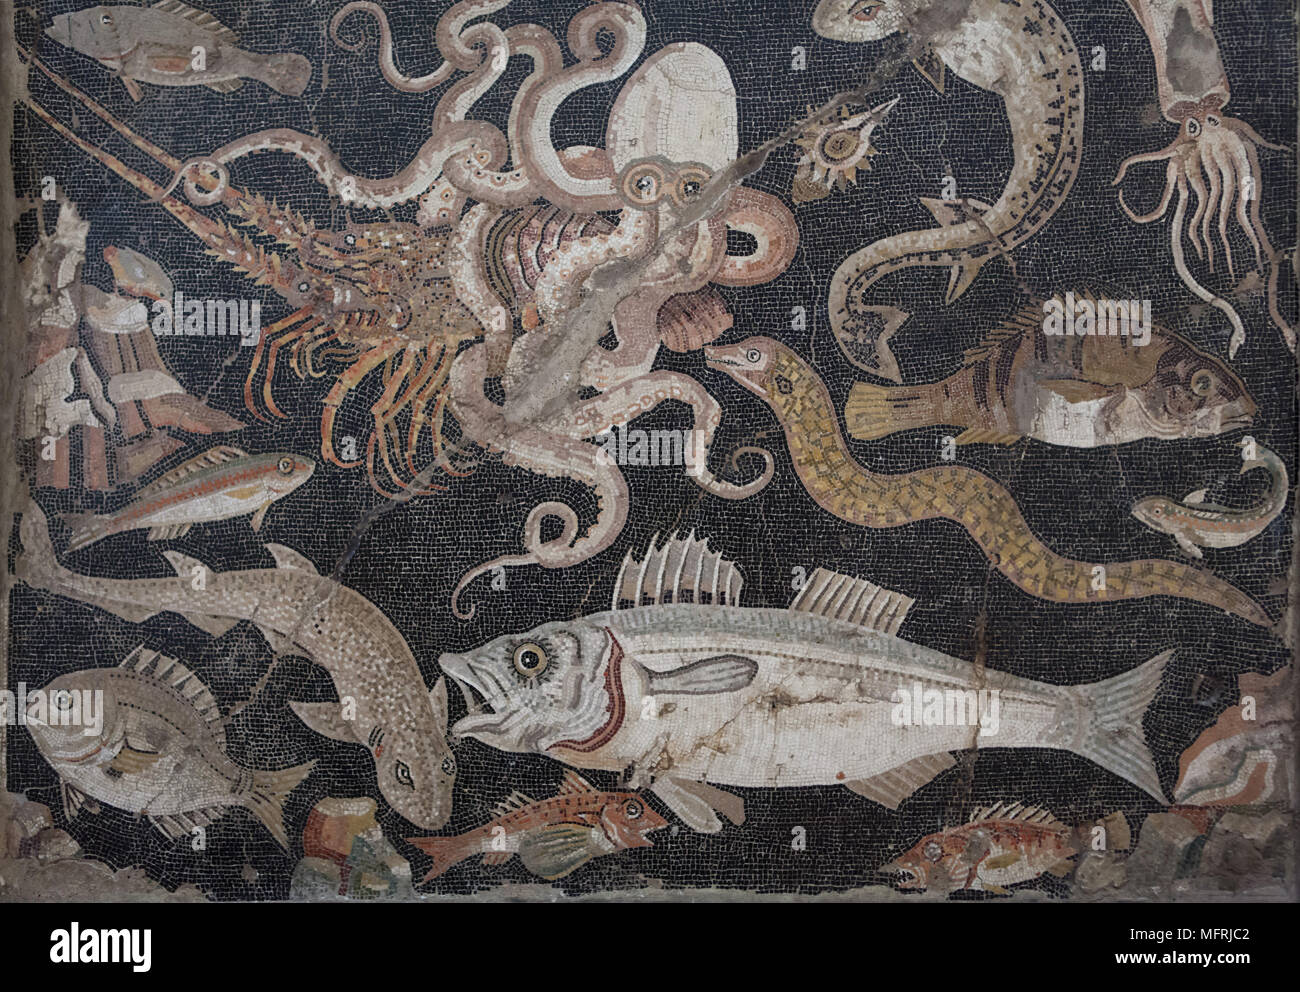 Marine life (Fish catalogue) depicted in the Roman mosaic from the Casa di Lucius Aelius Magnus (House of Lucius Aelius Magnus) in Pompeii, now on display in the National Archaeological Museum (Museo Archeologico Nazionale di Napoli) in Naples, Campania, Italy. Common octopus (Octopus vulgaris), Mediterranean lobster (Palinurus elephas) and European conger (Conger conger) are depicted in the mosaic. Stock Photo